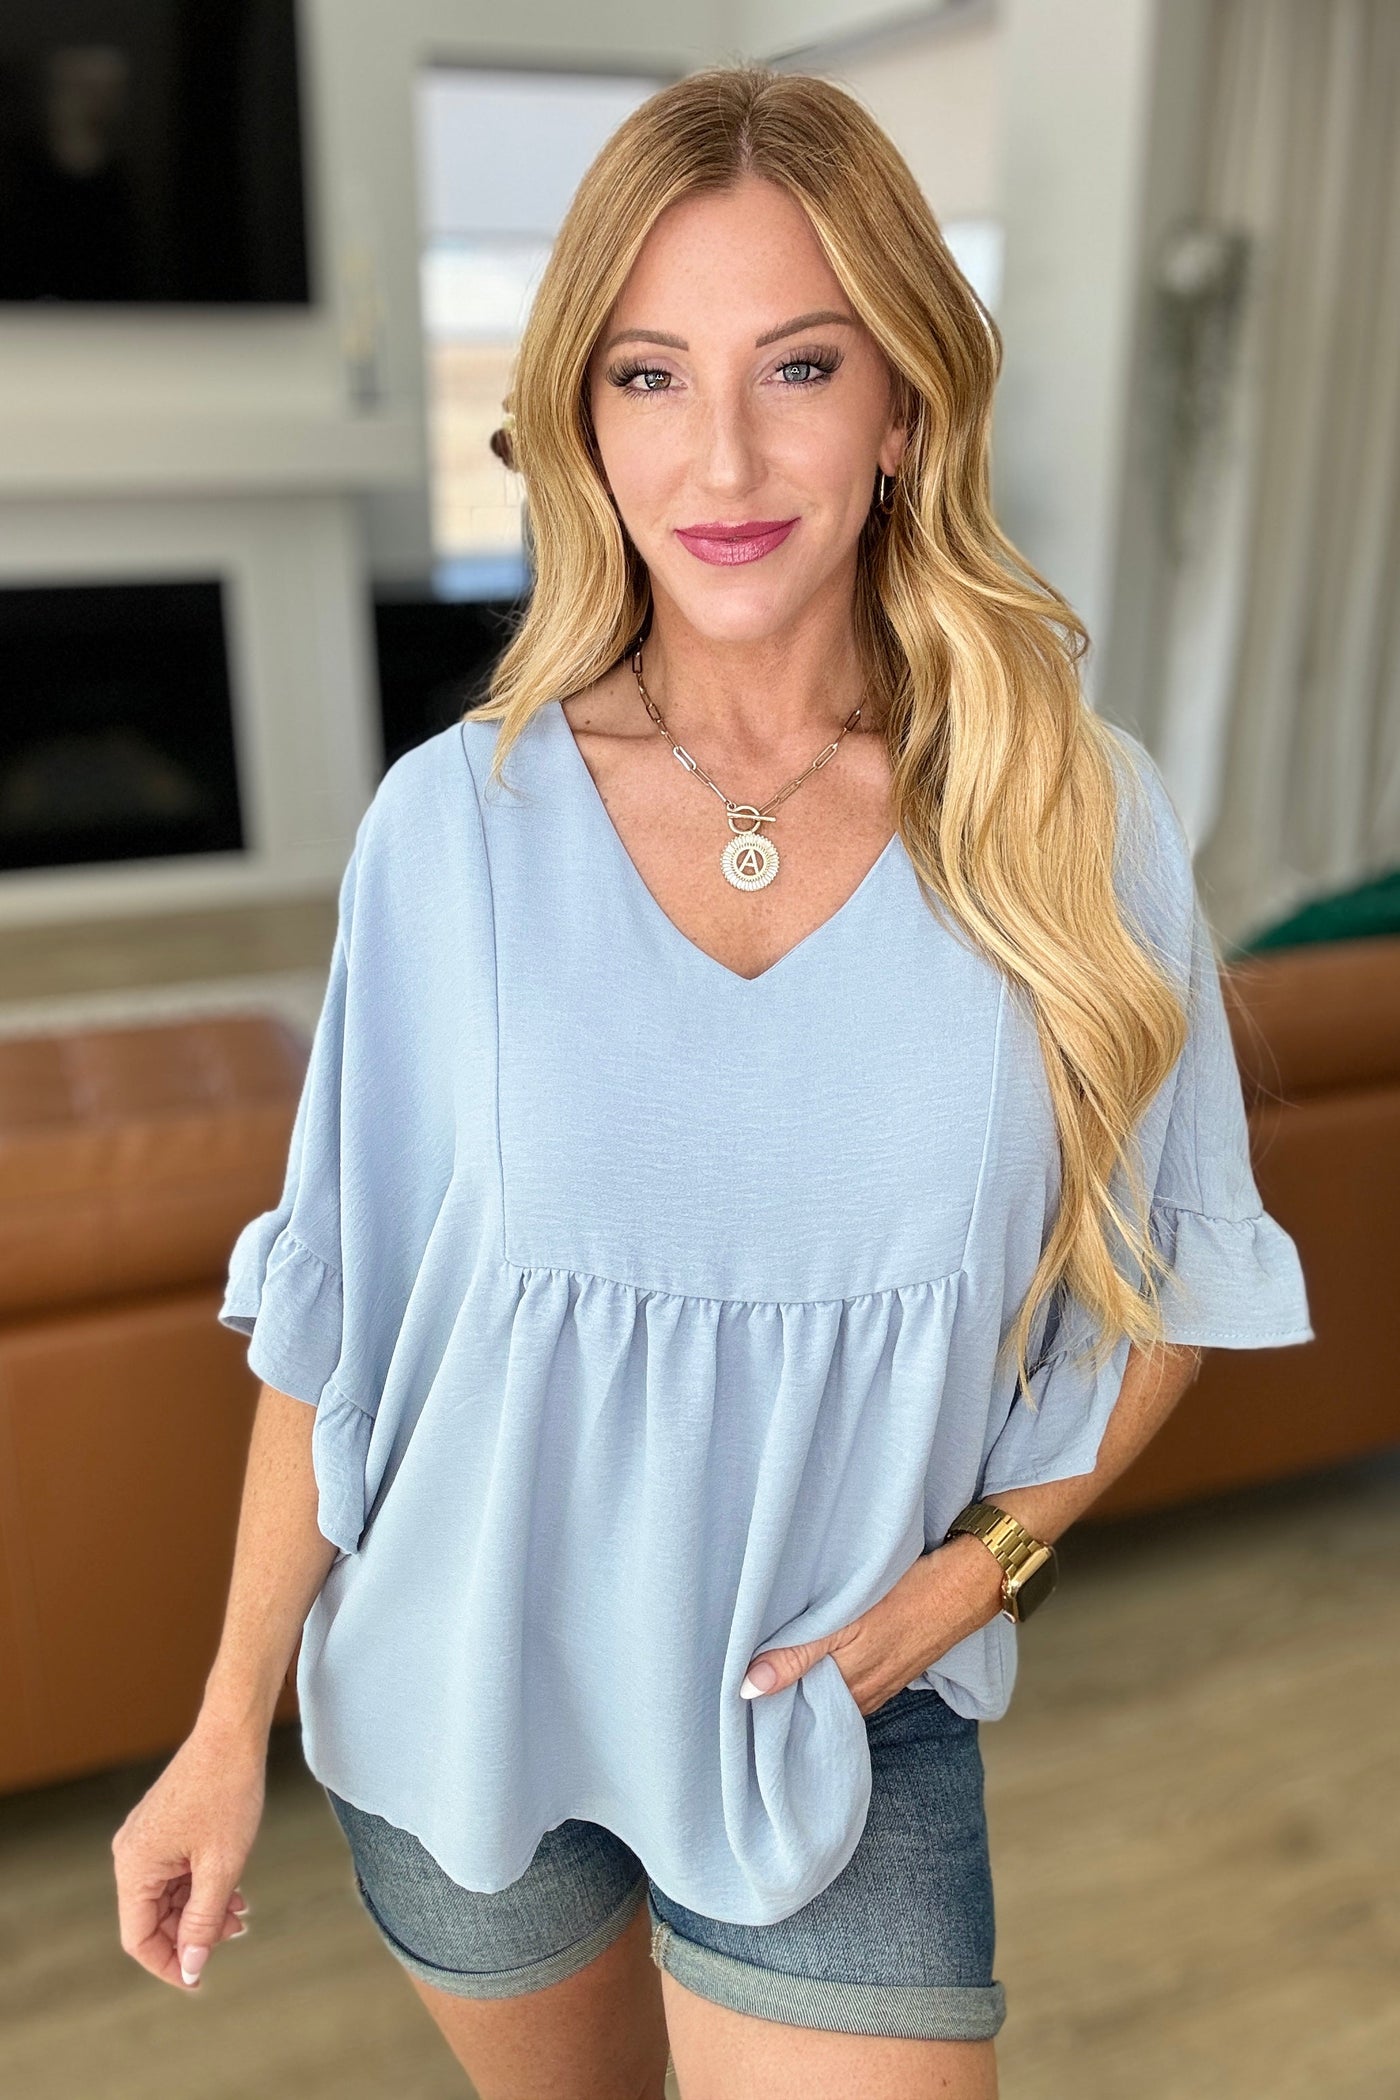 Airflow Peplum Ruffle Sleeve Top in Chambray-Tops-Ave Shops-Market Street Nest, Fashionable Clothing, Shoes and Home Décor Located in Mabank, TX